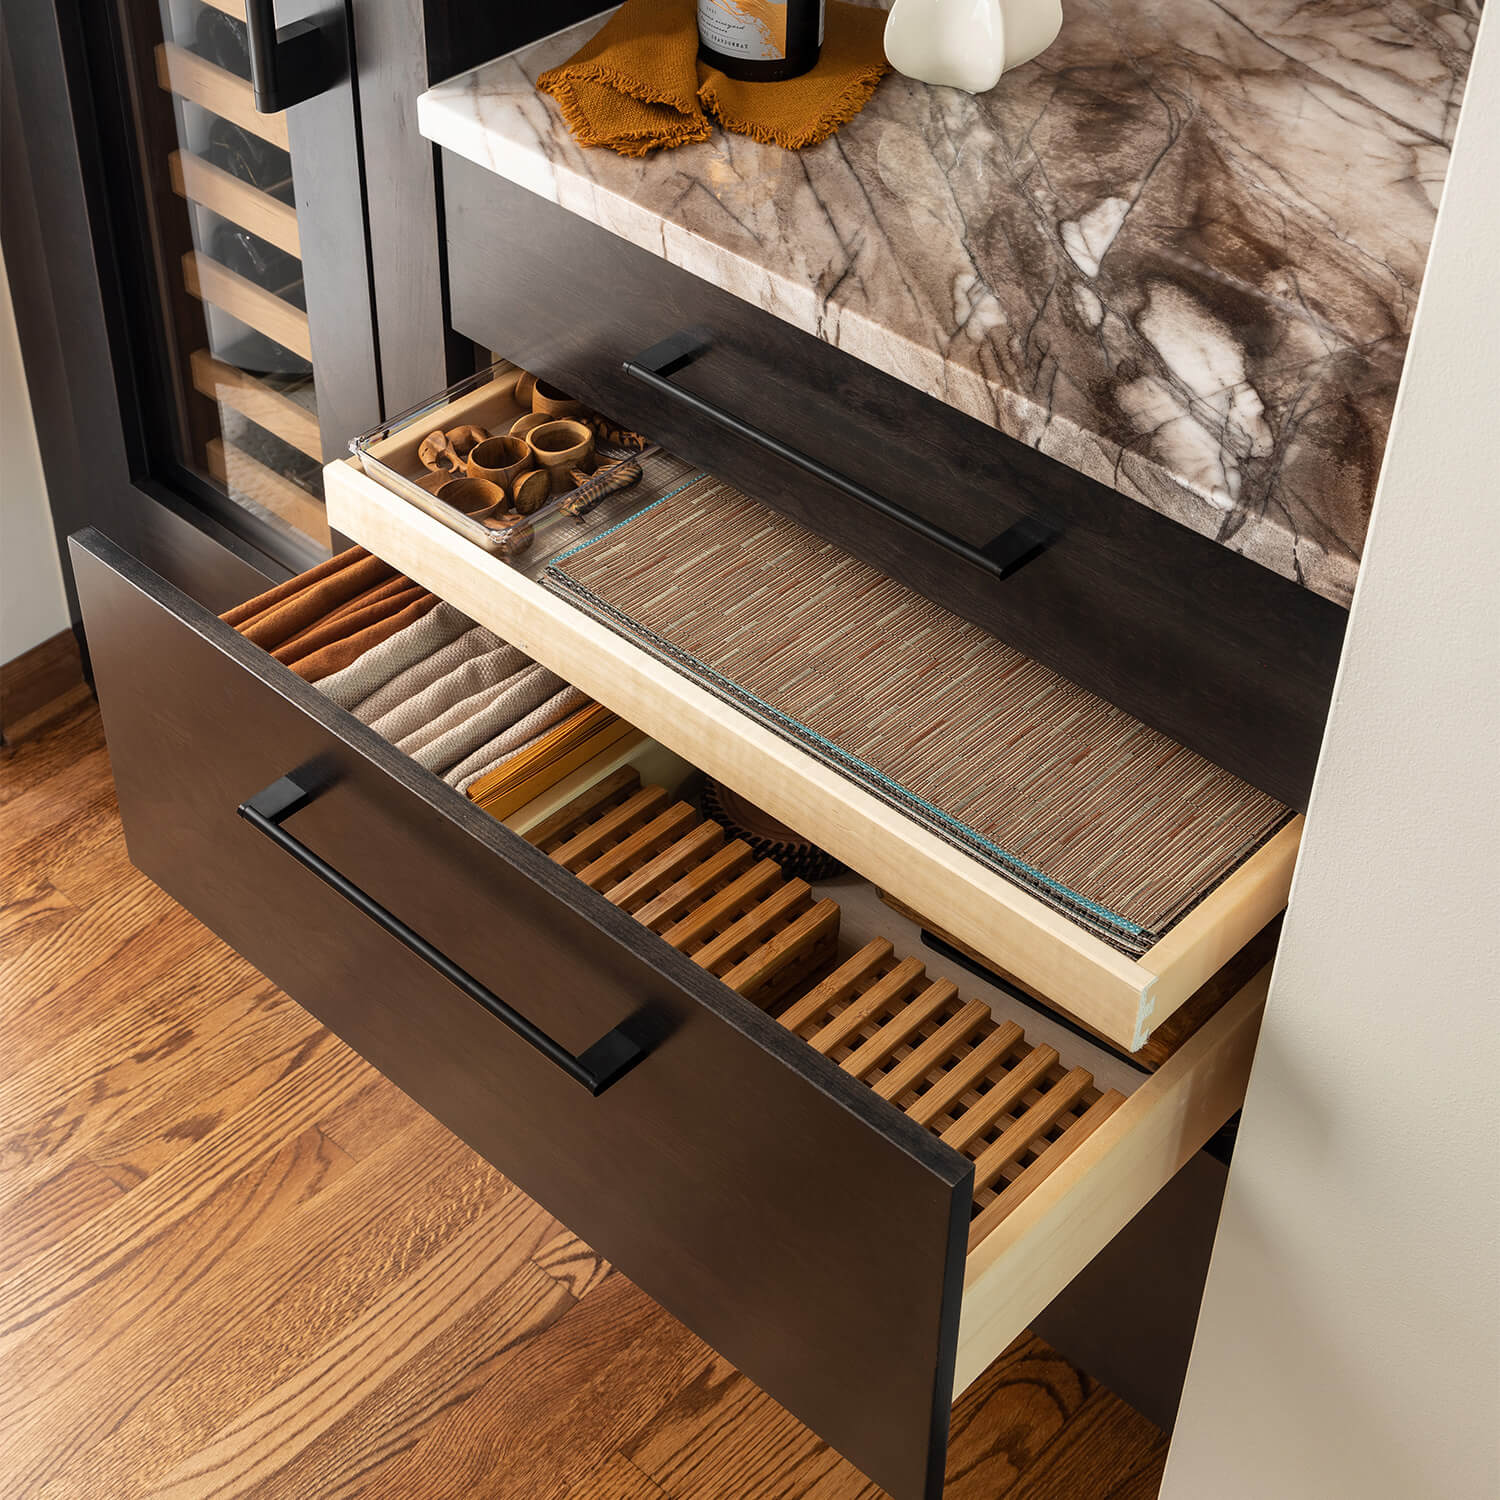 Shallow Roll-Out Above Drawer with an Adjustable Deep Drawer Partition